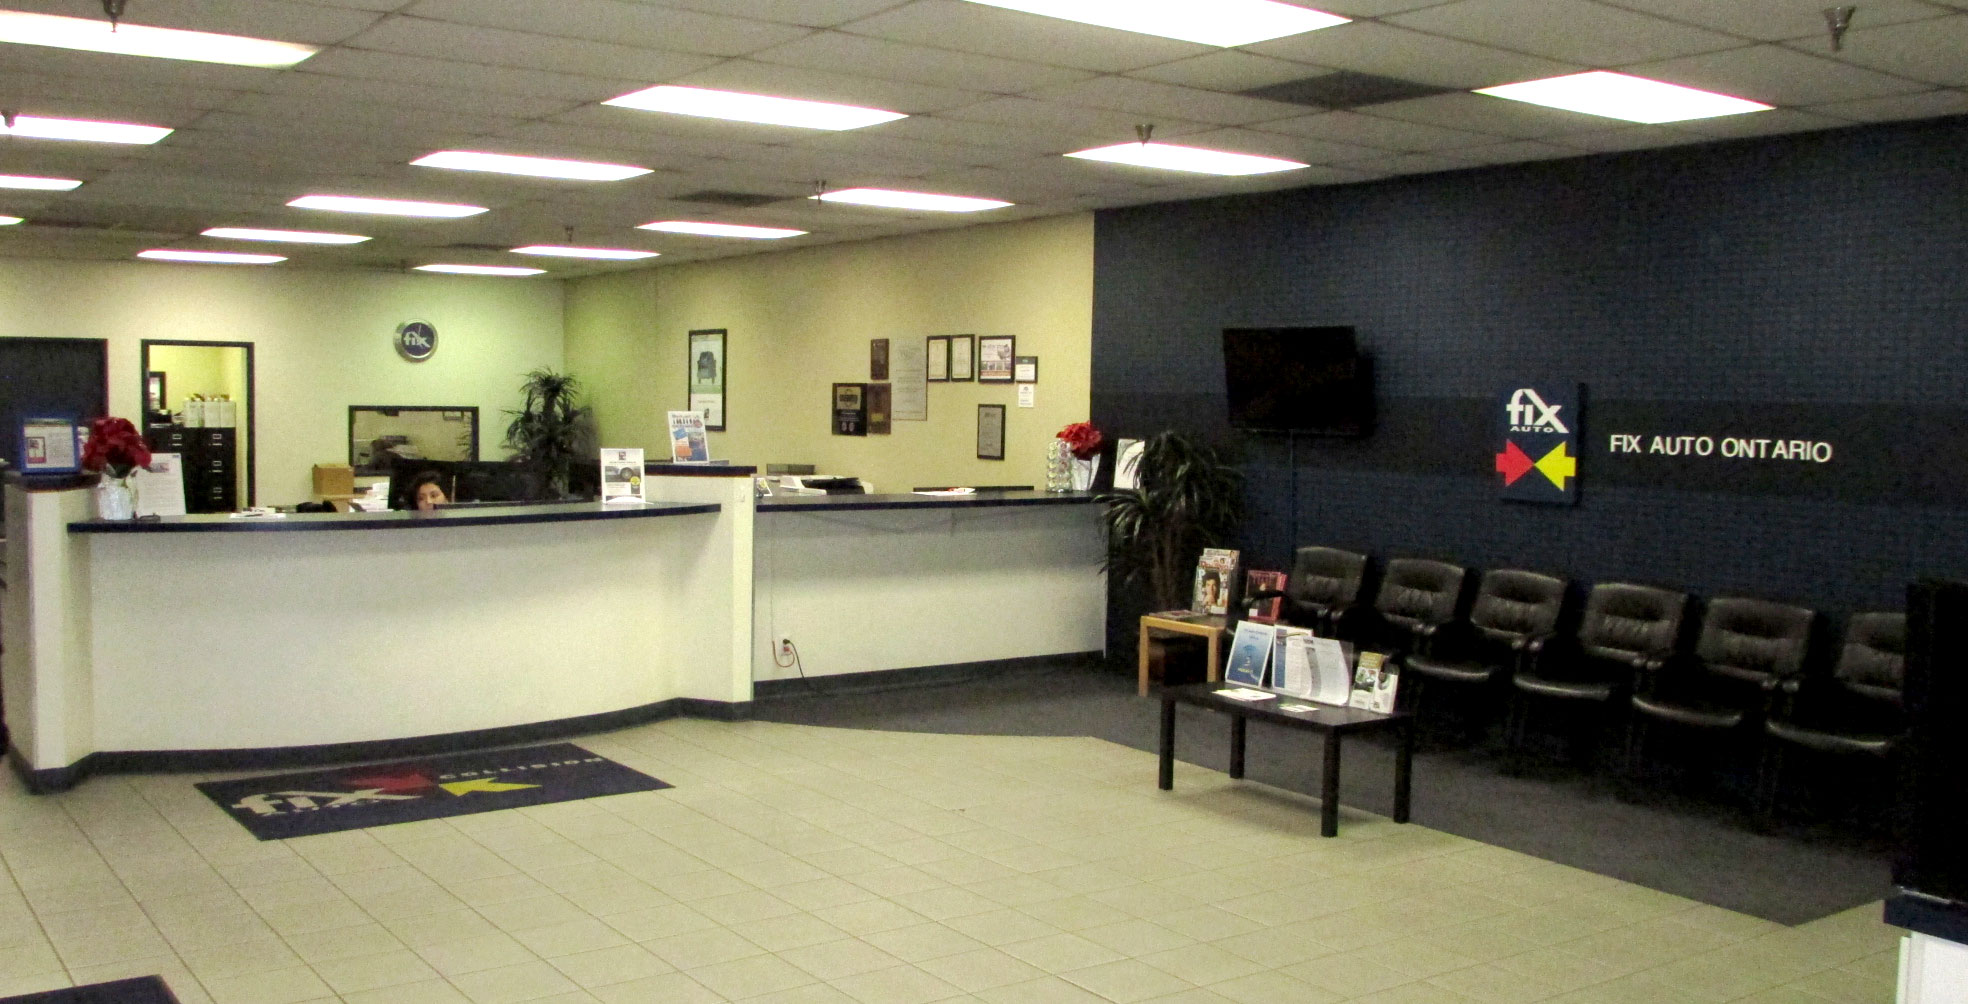 Fix Auto Ontario Collision Repair Lobby and Front Desk